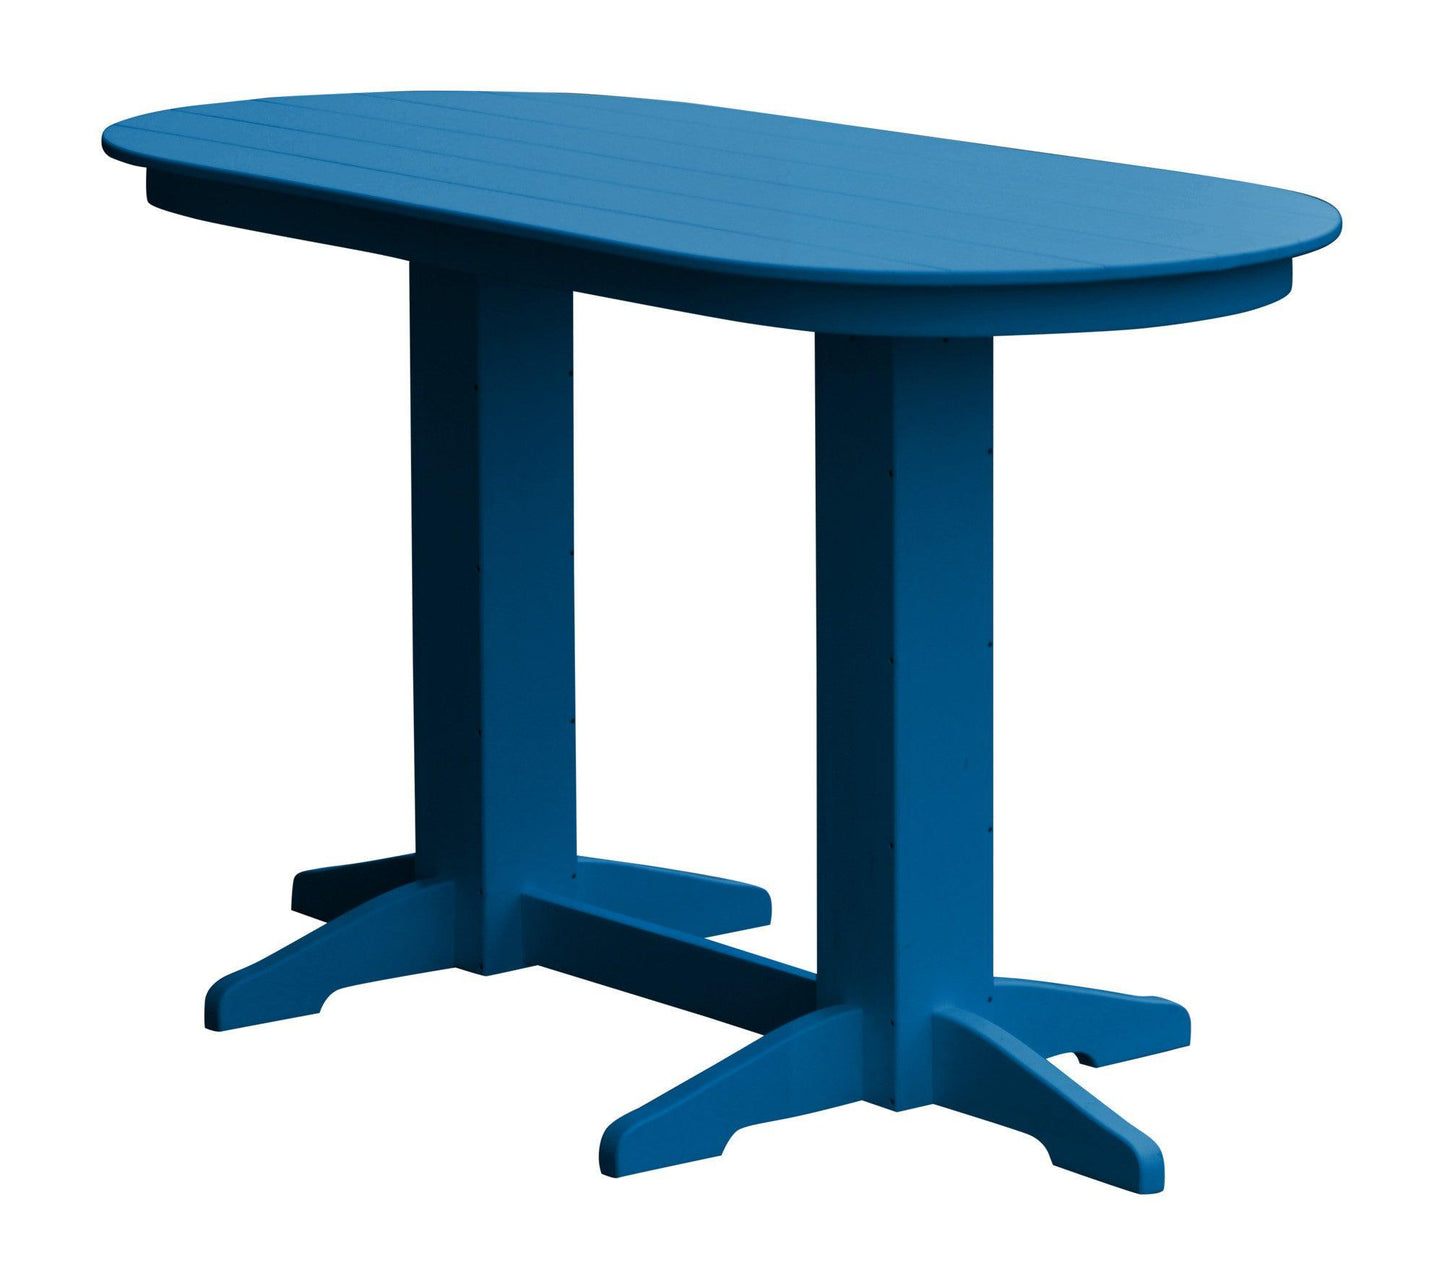 A&L Furniture Recycled Plastic 6' Oval Bar Table - Blue